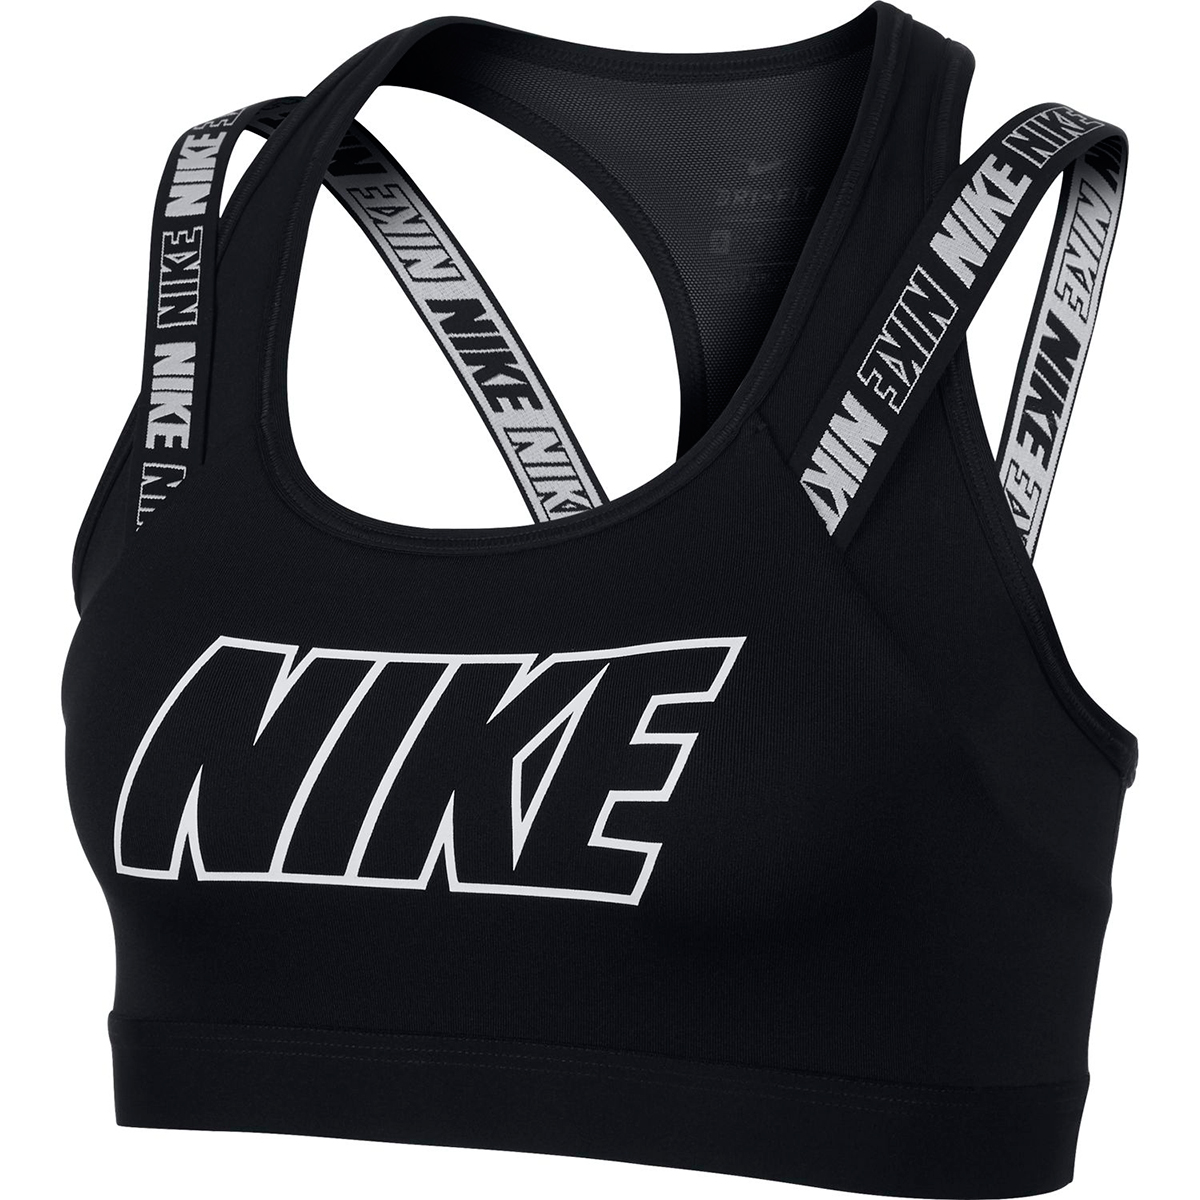 Nike Training Victory Compression HBR sports bra with large logo in grey